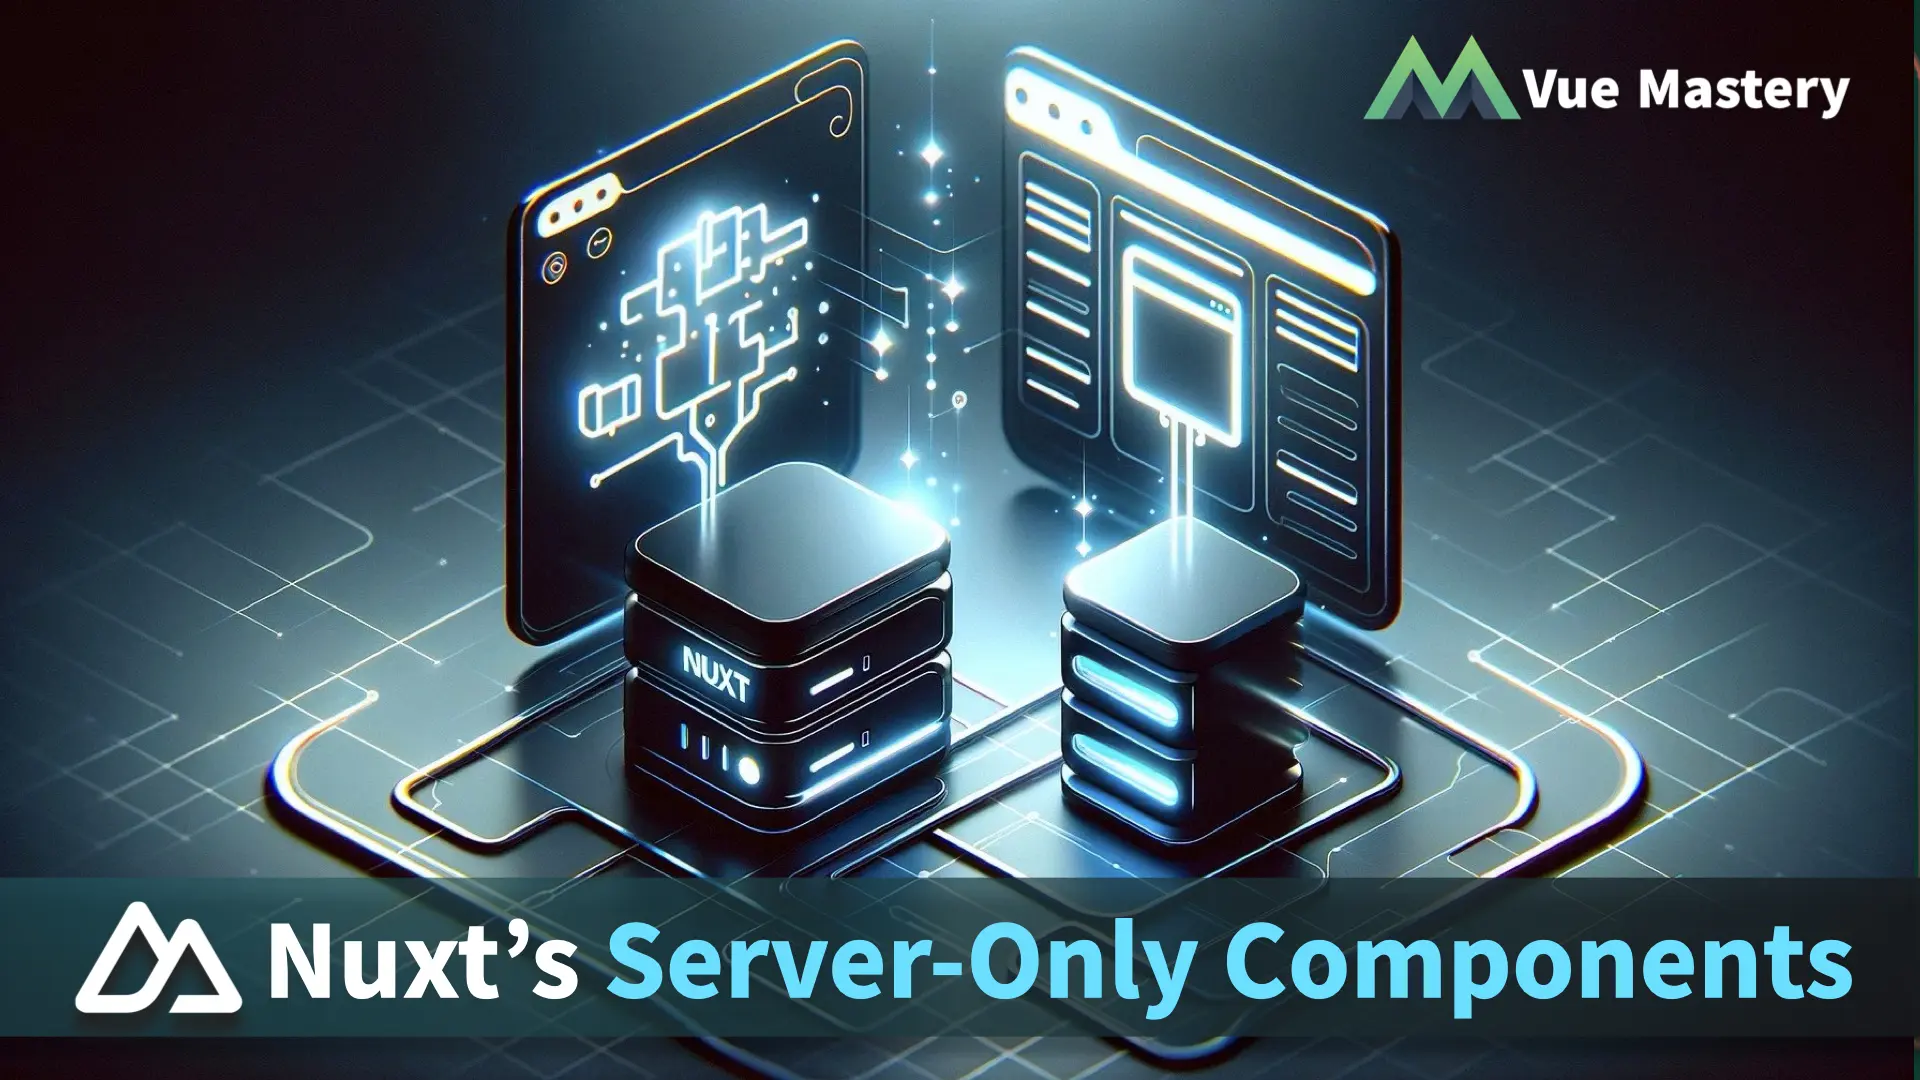 Nuxt's Server-Only Components should be on your radar